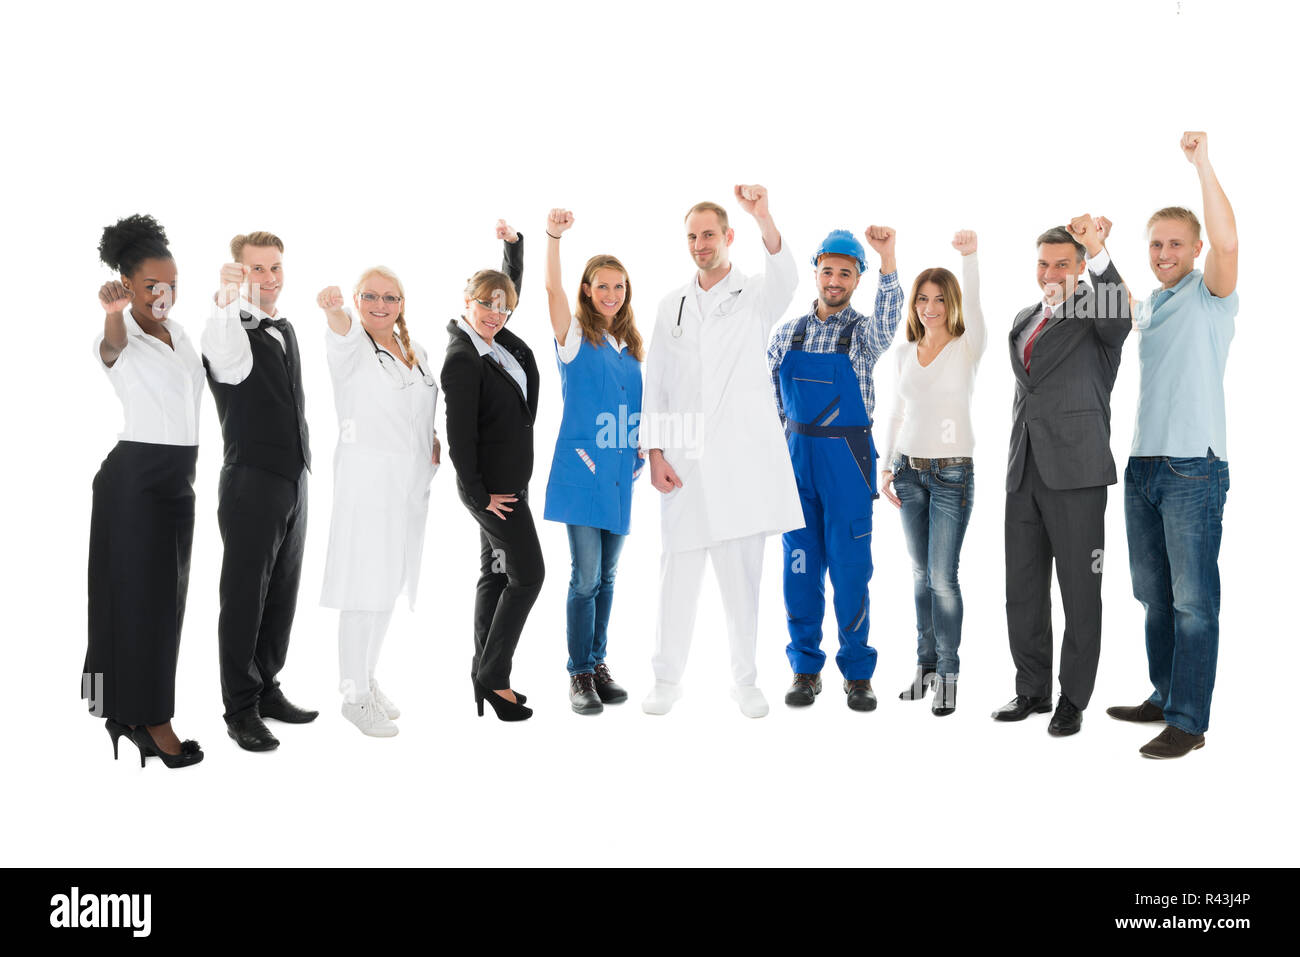 Portrait Of People With Various Occupations Cheering Stock Photo